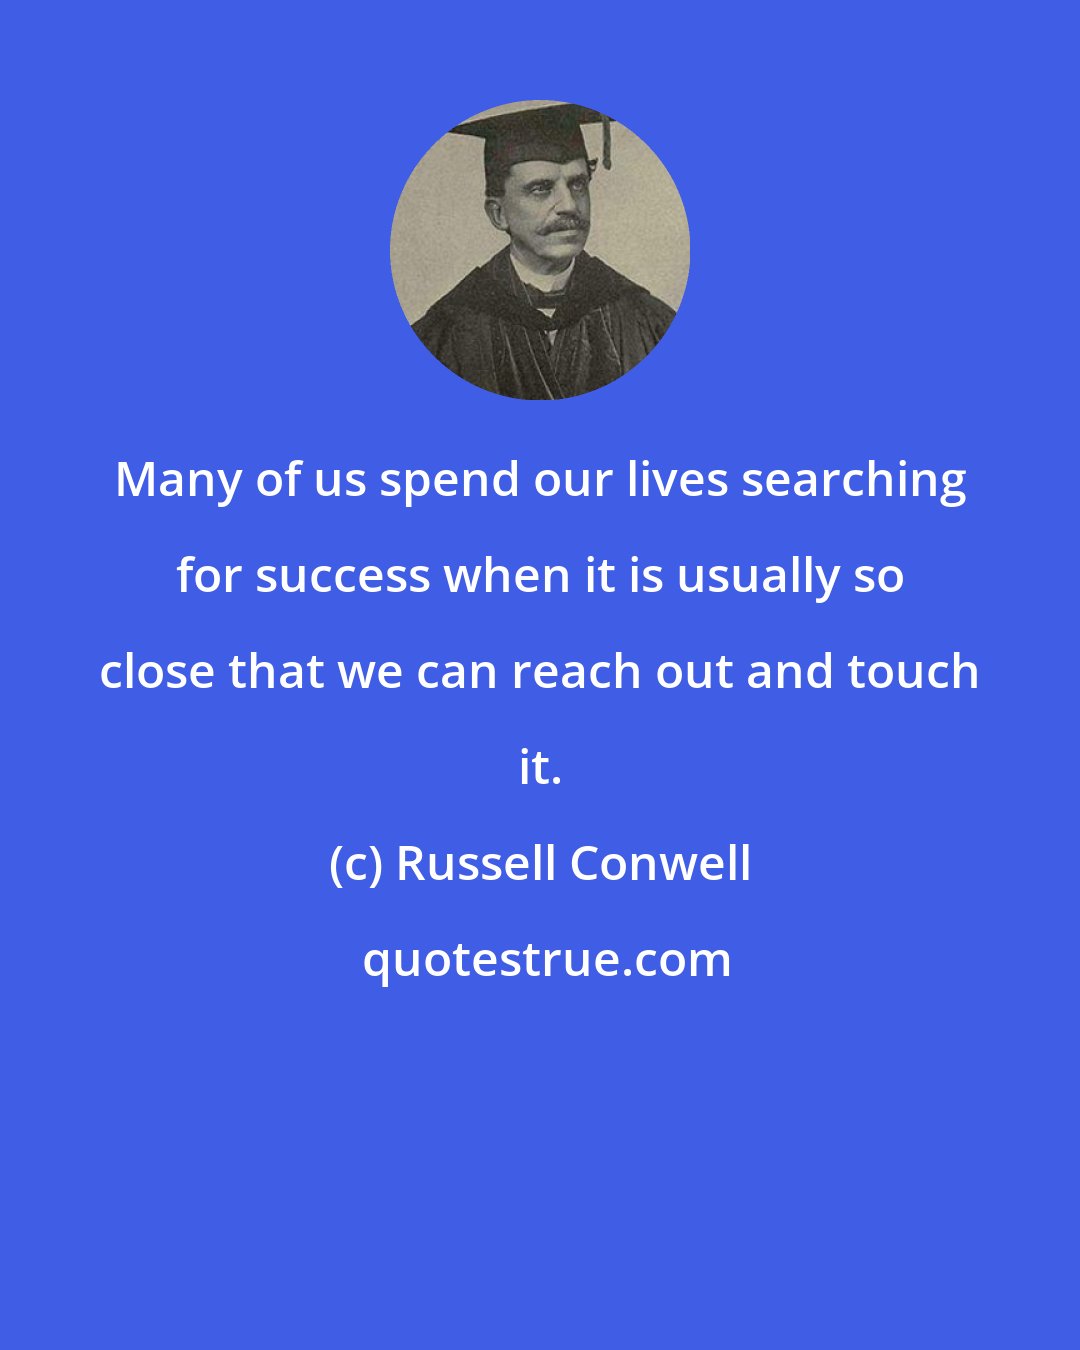 Russell Conwell: Many of us spend our lives searching for success when it is usually so close that we can reach out and touch it.